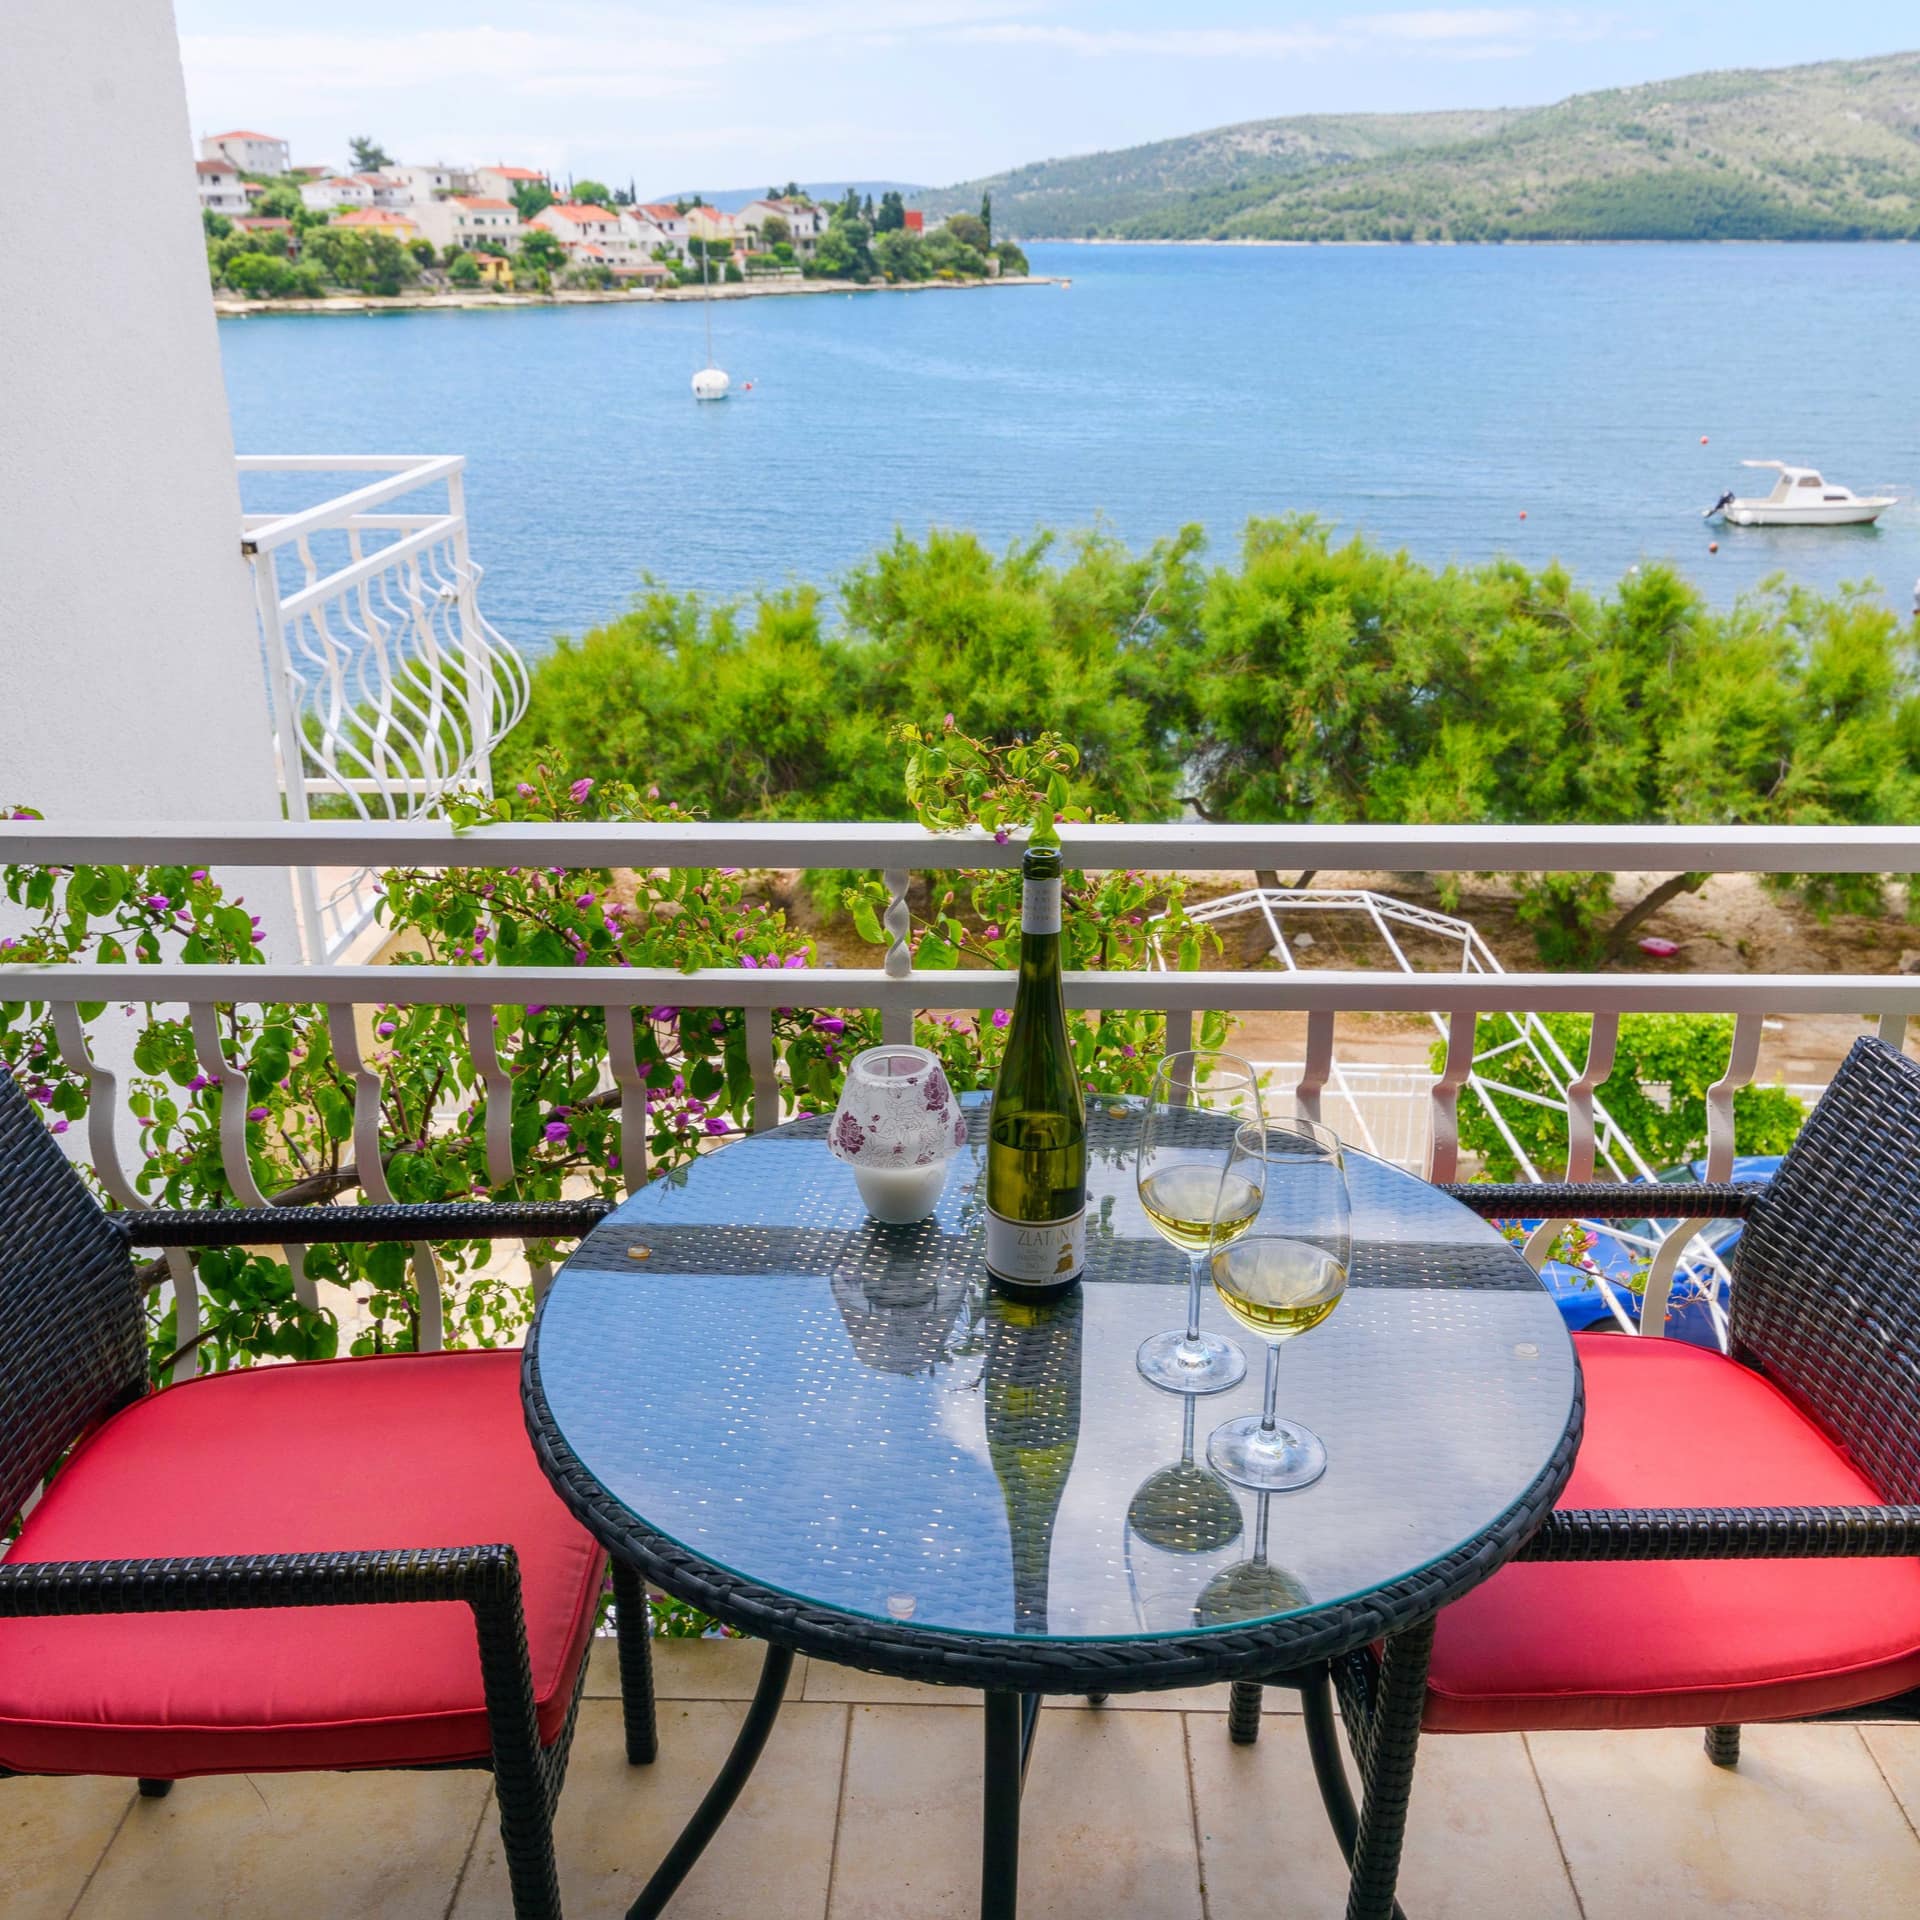 Two glasses of wine on a dining table for 2, set up on a Croatian villa rental’s sea-facing balcony